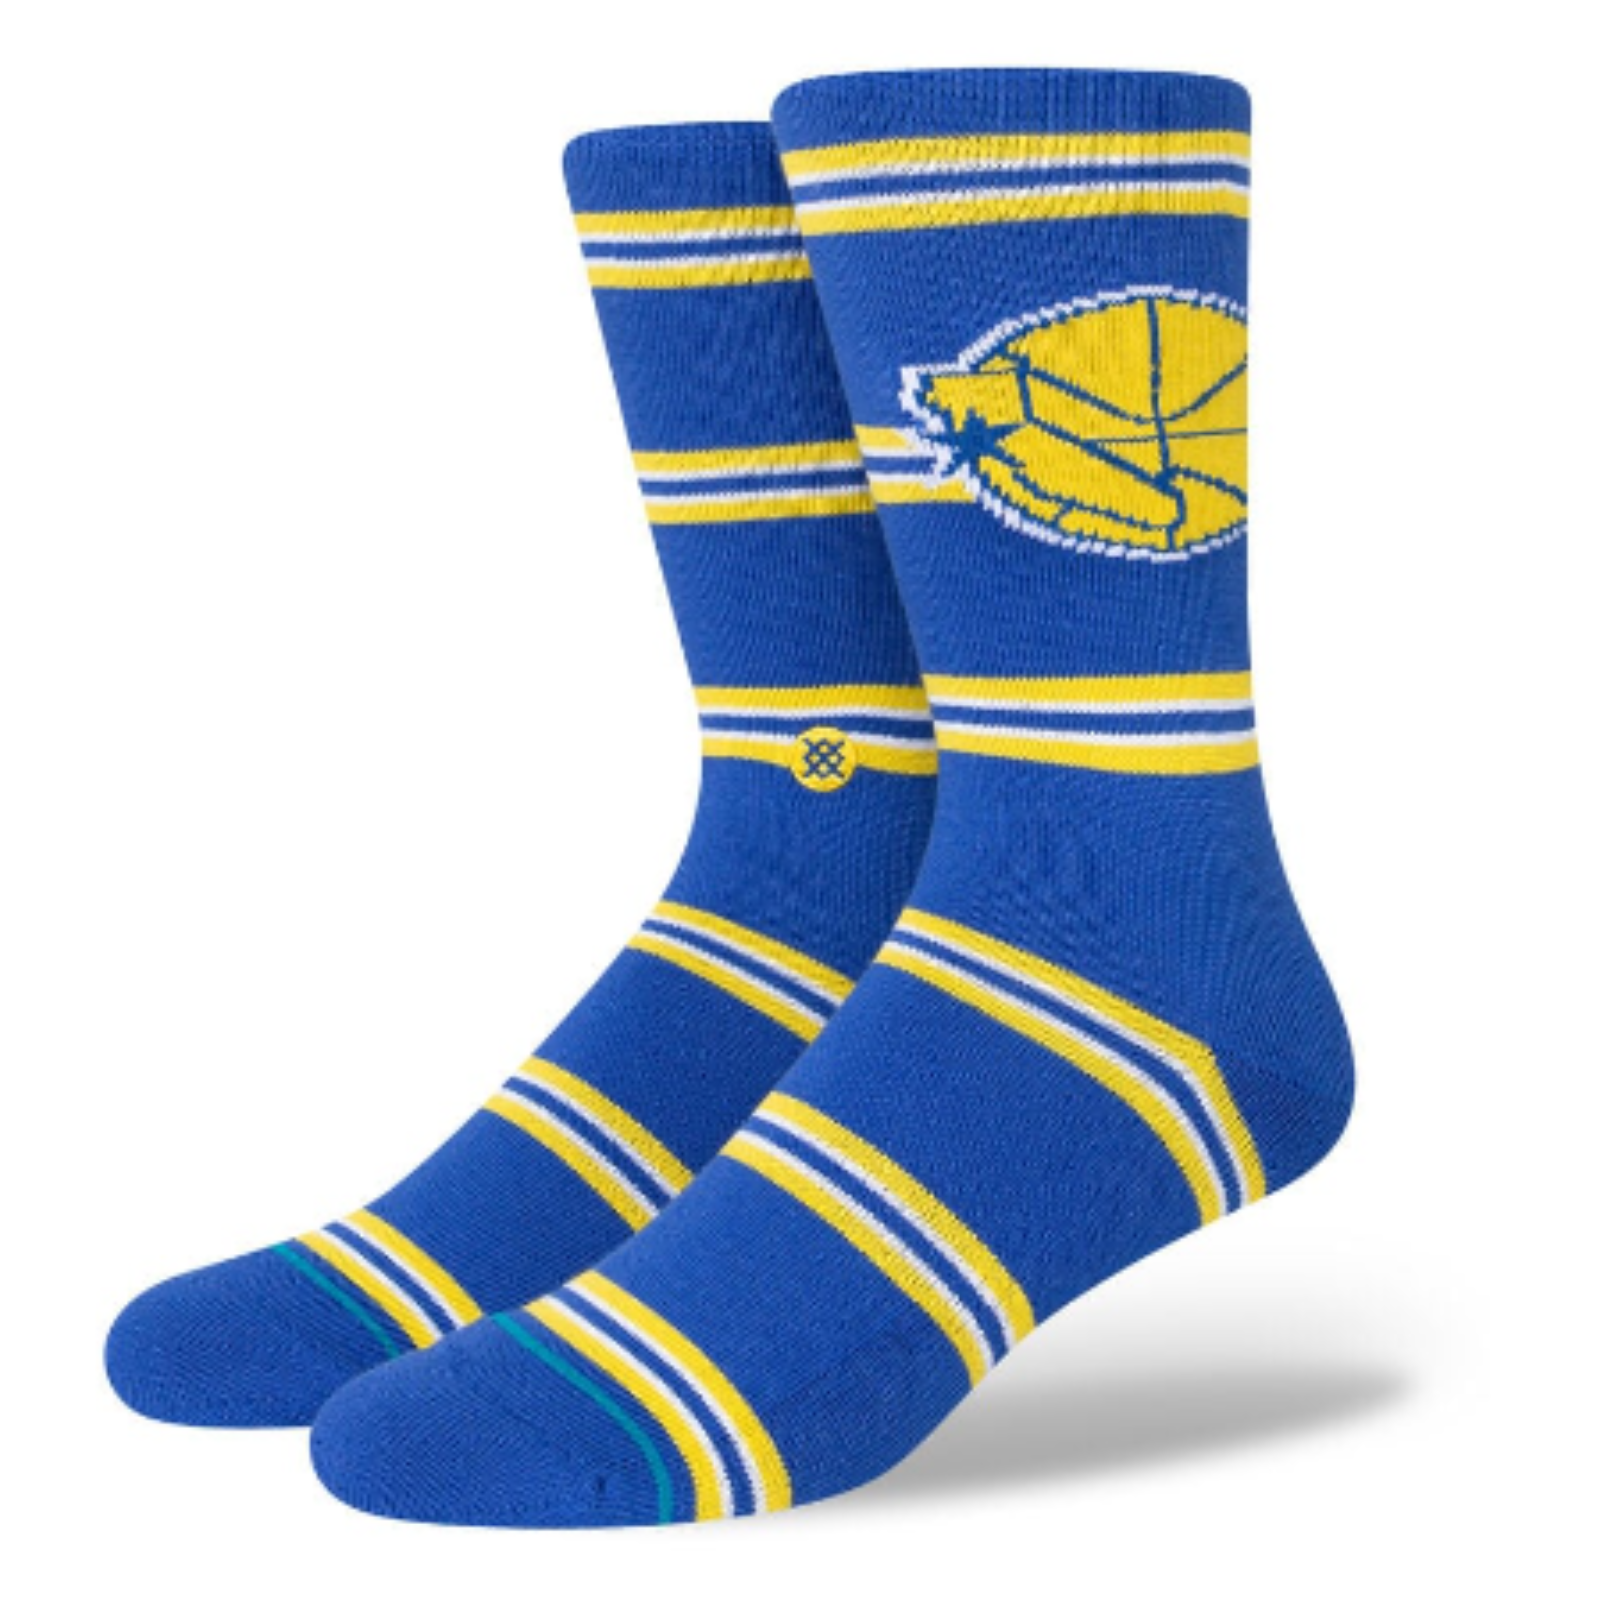 Stance NBA Classics Warriors men's crew sock featuring yellow and blue stripes and Warriors logo. Socks shown on display feet from the side. 